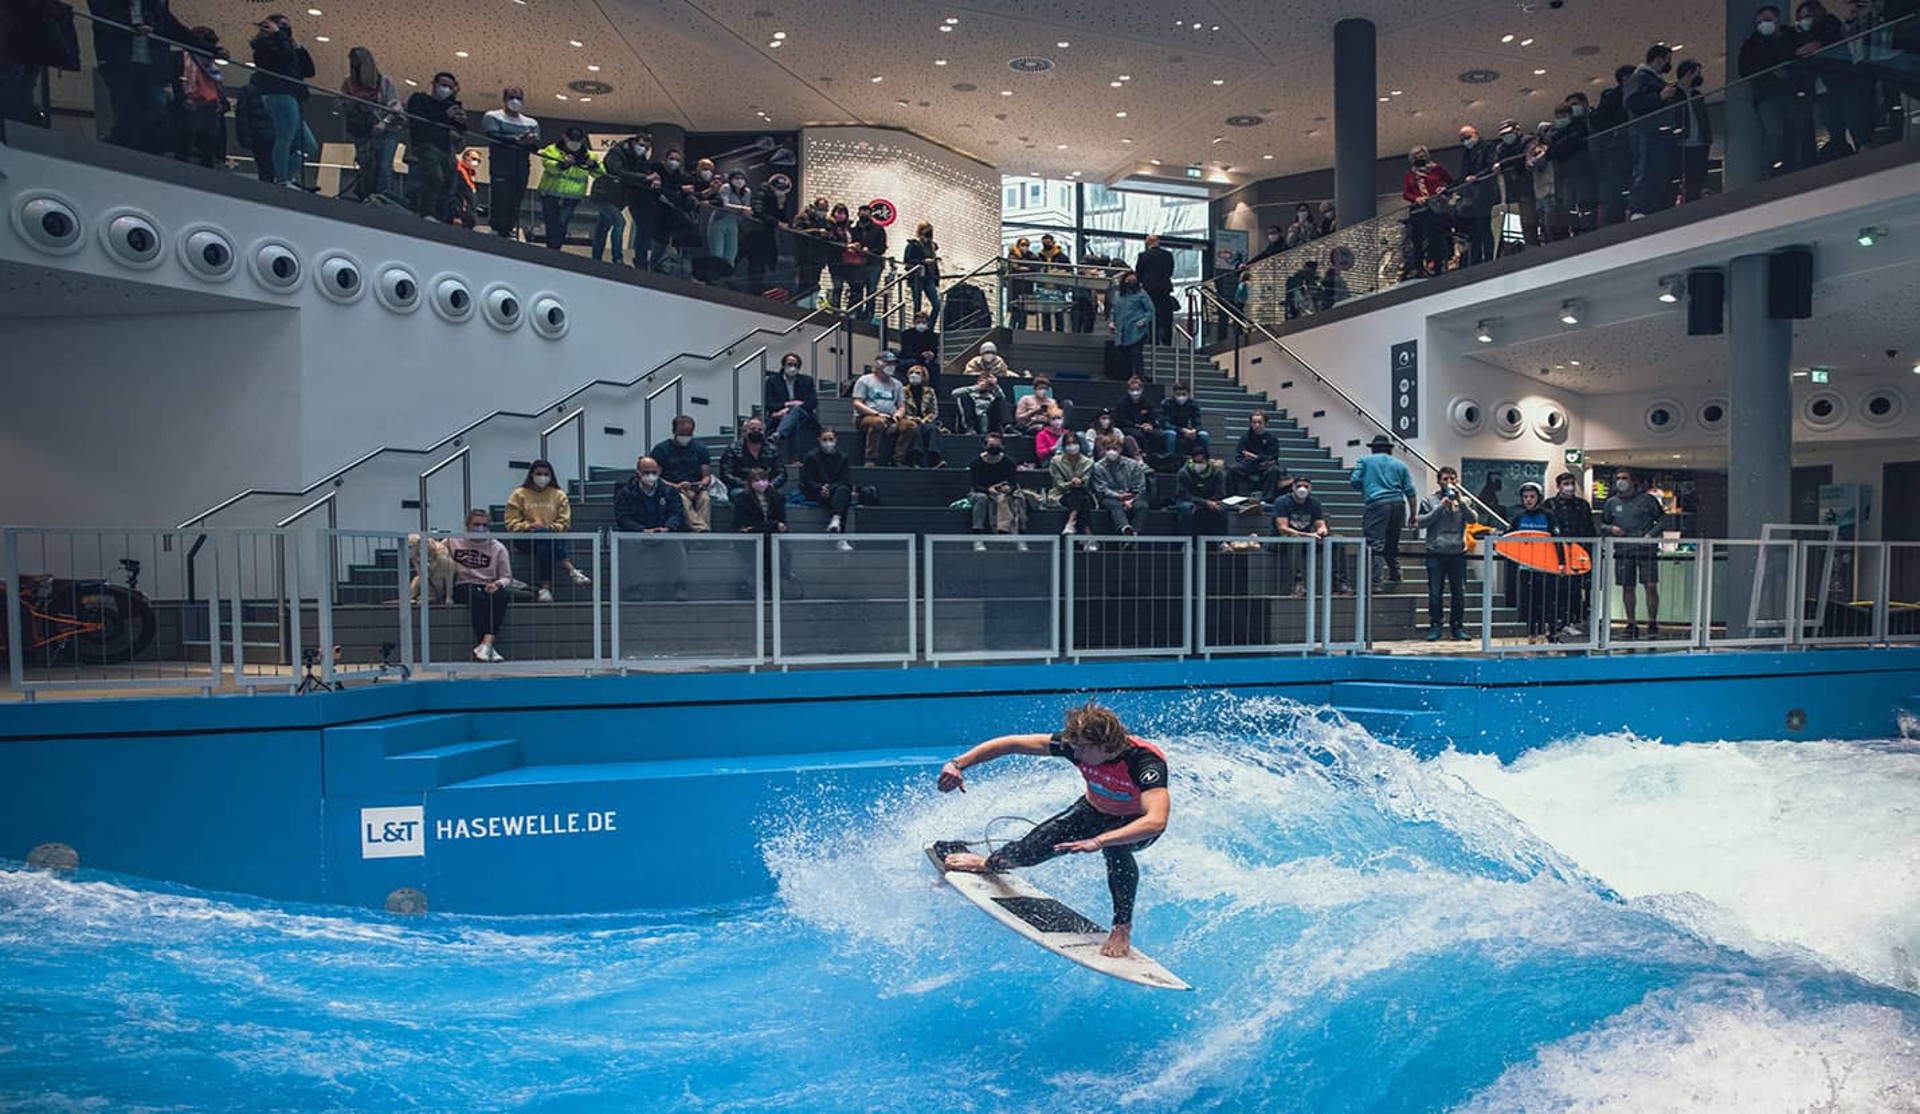 An indoor surfer on a standing wave